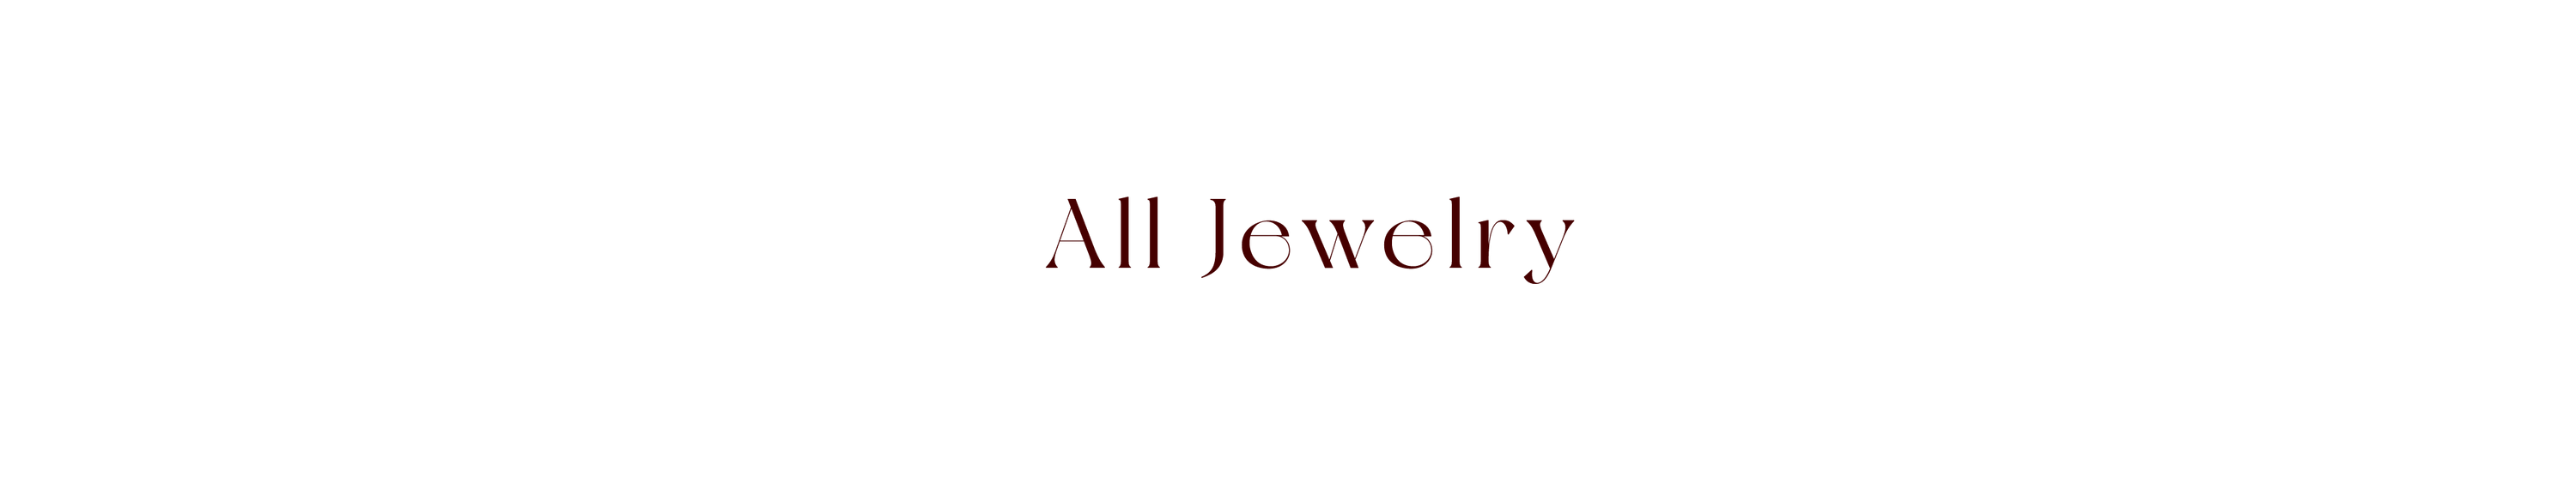 All Jewelry - NUJUAL, Inc.